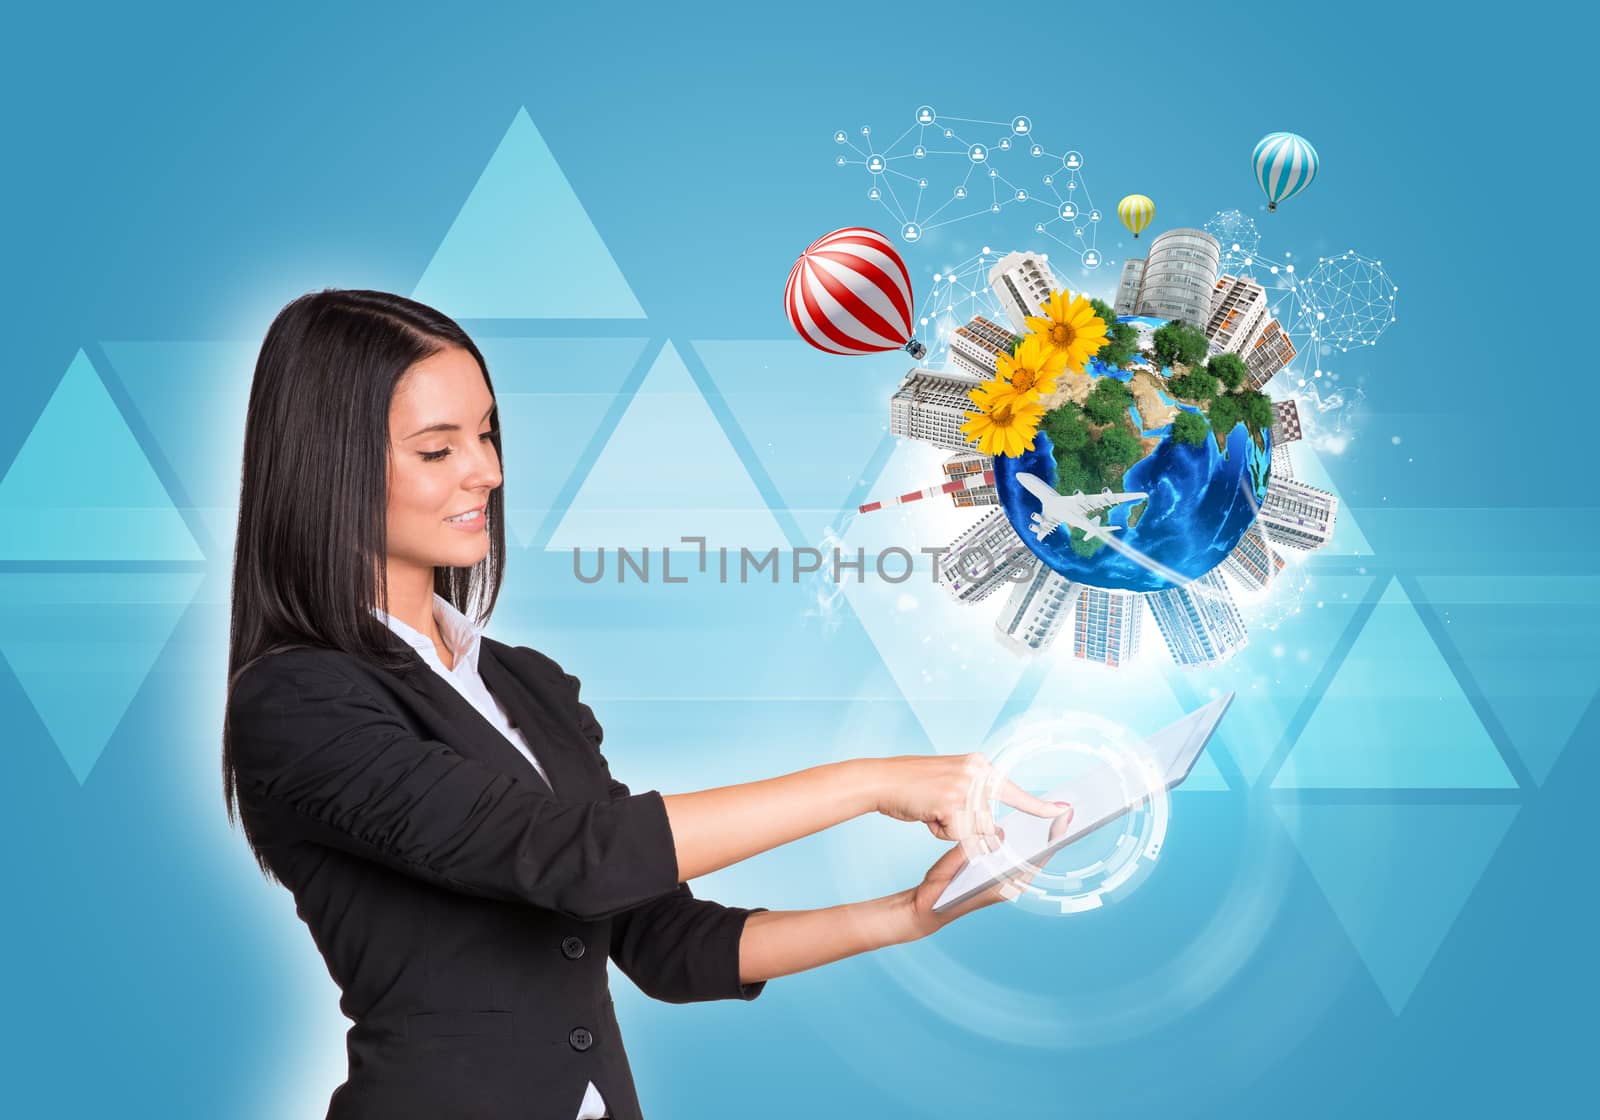 Beautiful businesswomen in suit using digital tablet. Earth with buildings, flowers, airplane and air balloons. Triangles as backdrop. Element of this image furnished by NASA